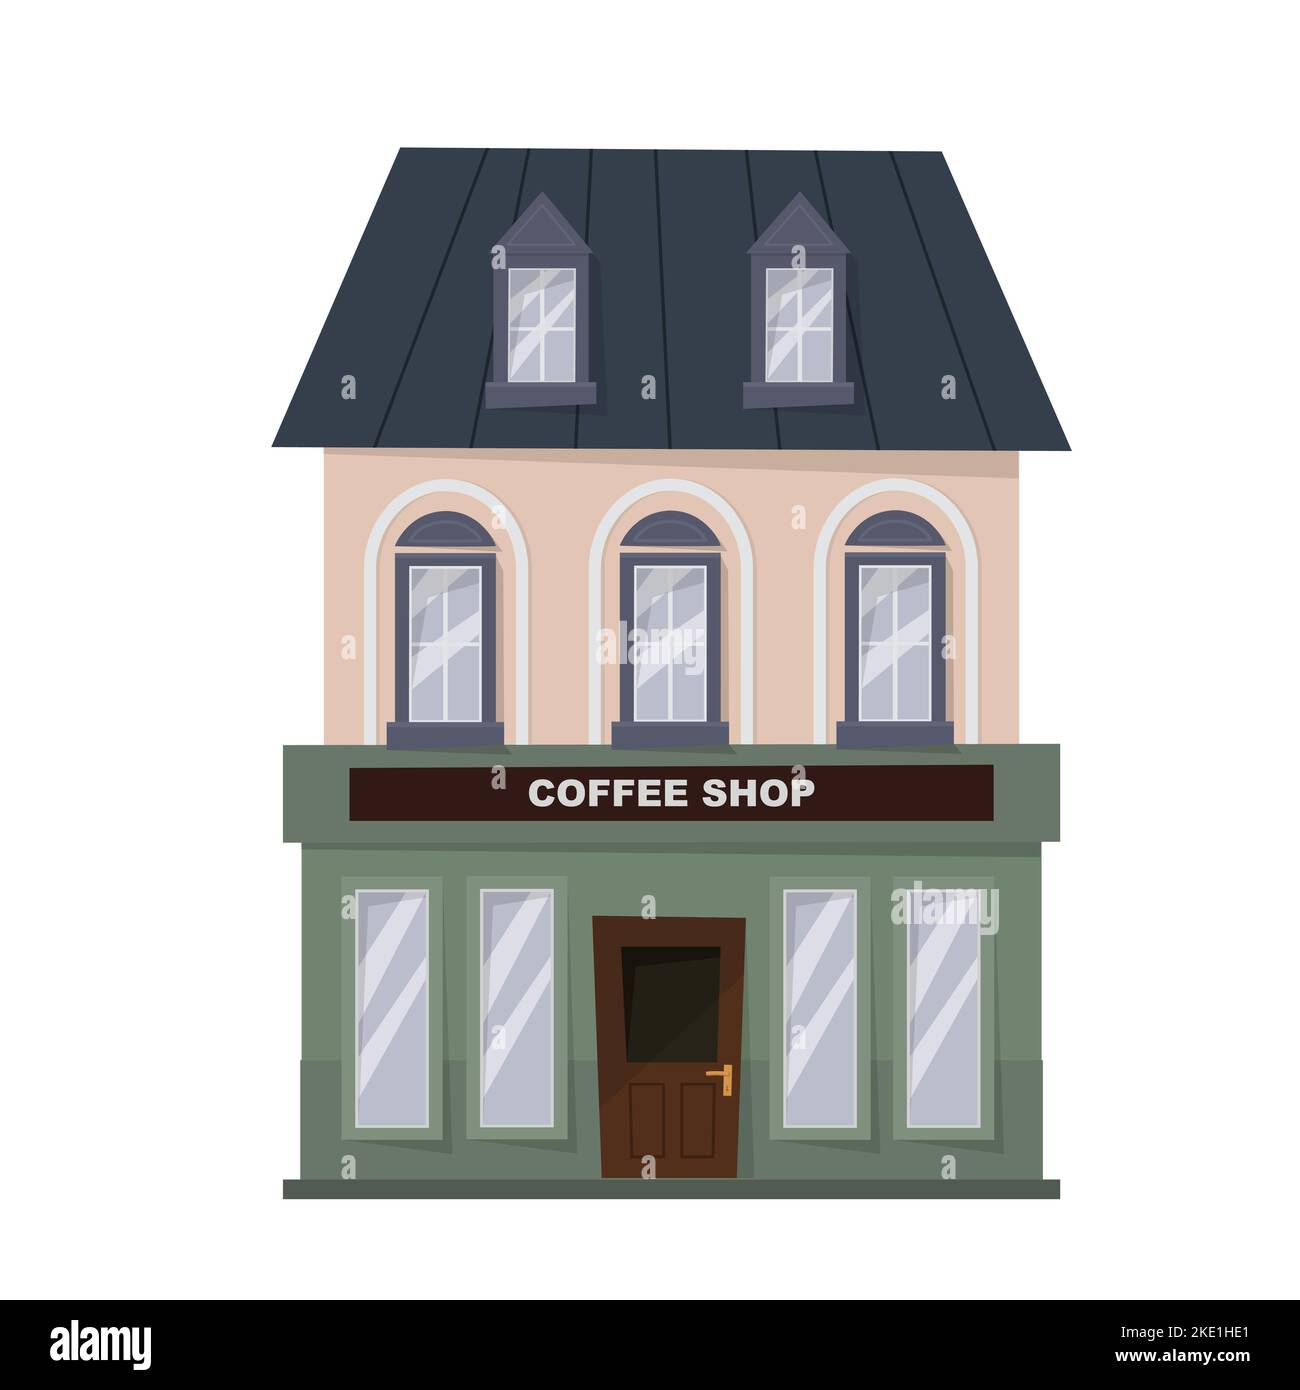 Coffee shop building facade. Coffee house in an old building with large windows. Flat style vector illustration. Isolated on white background. Stock Vector